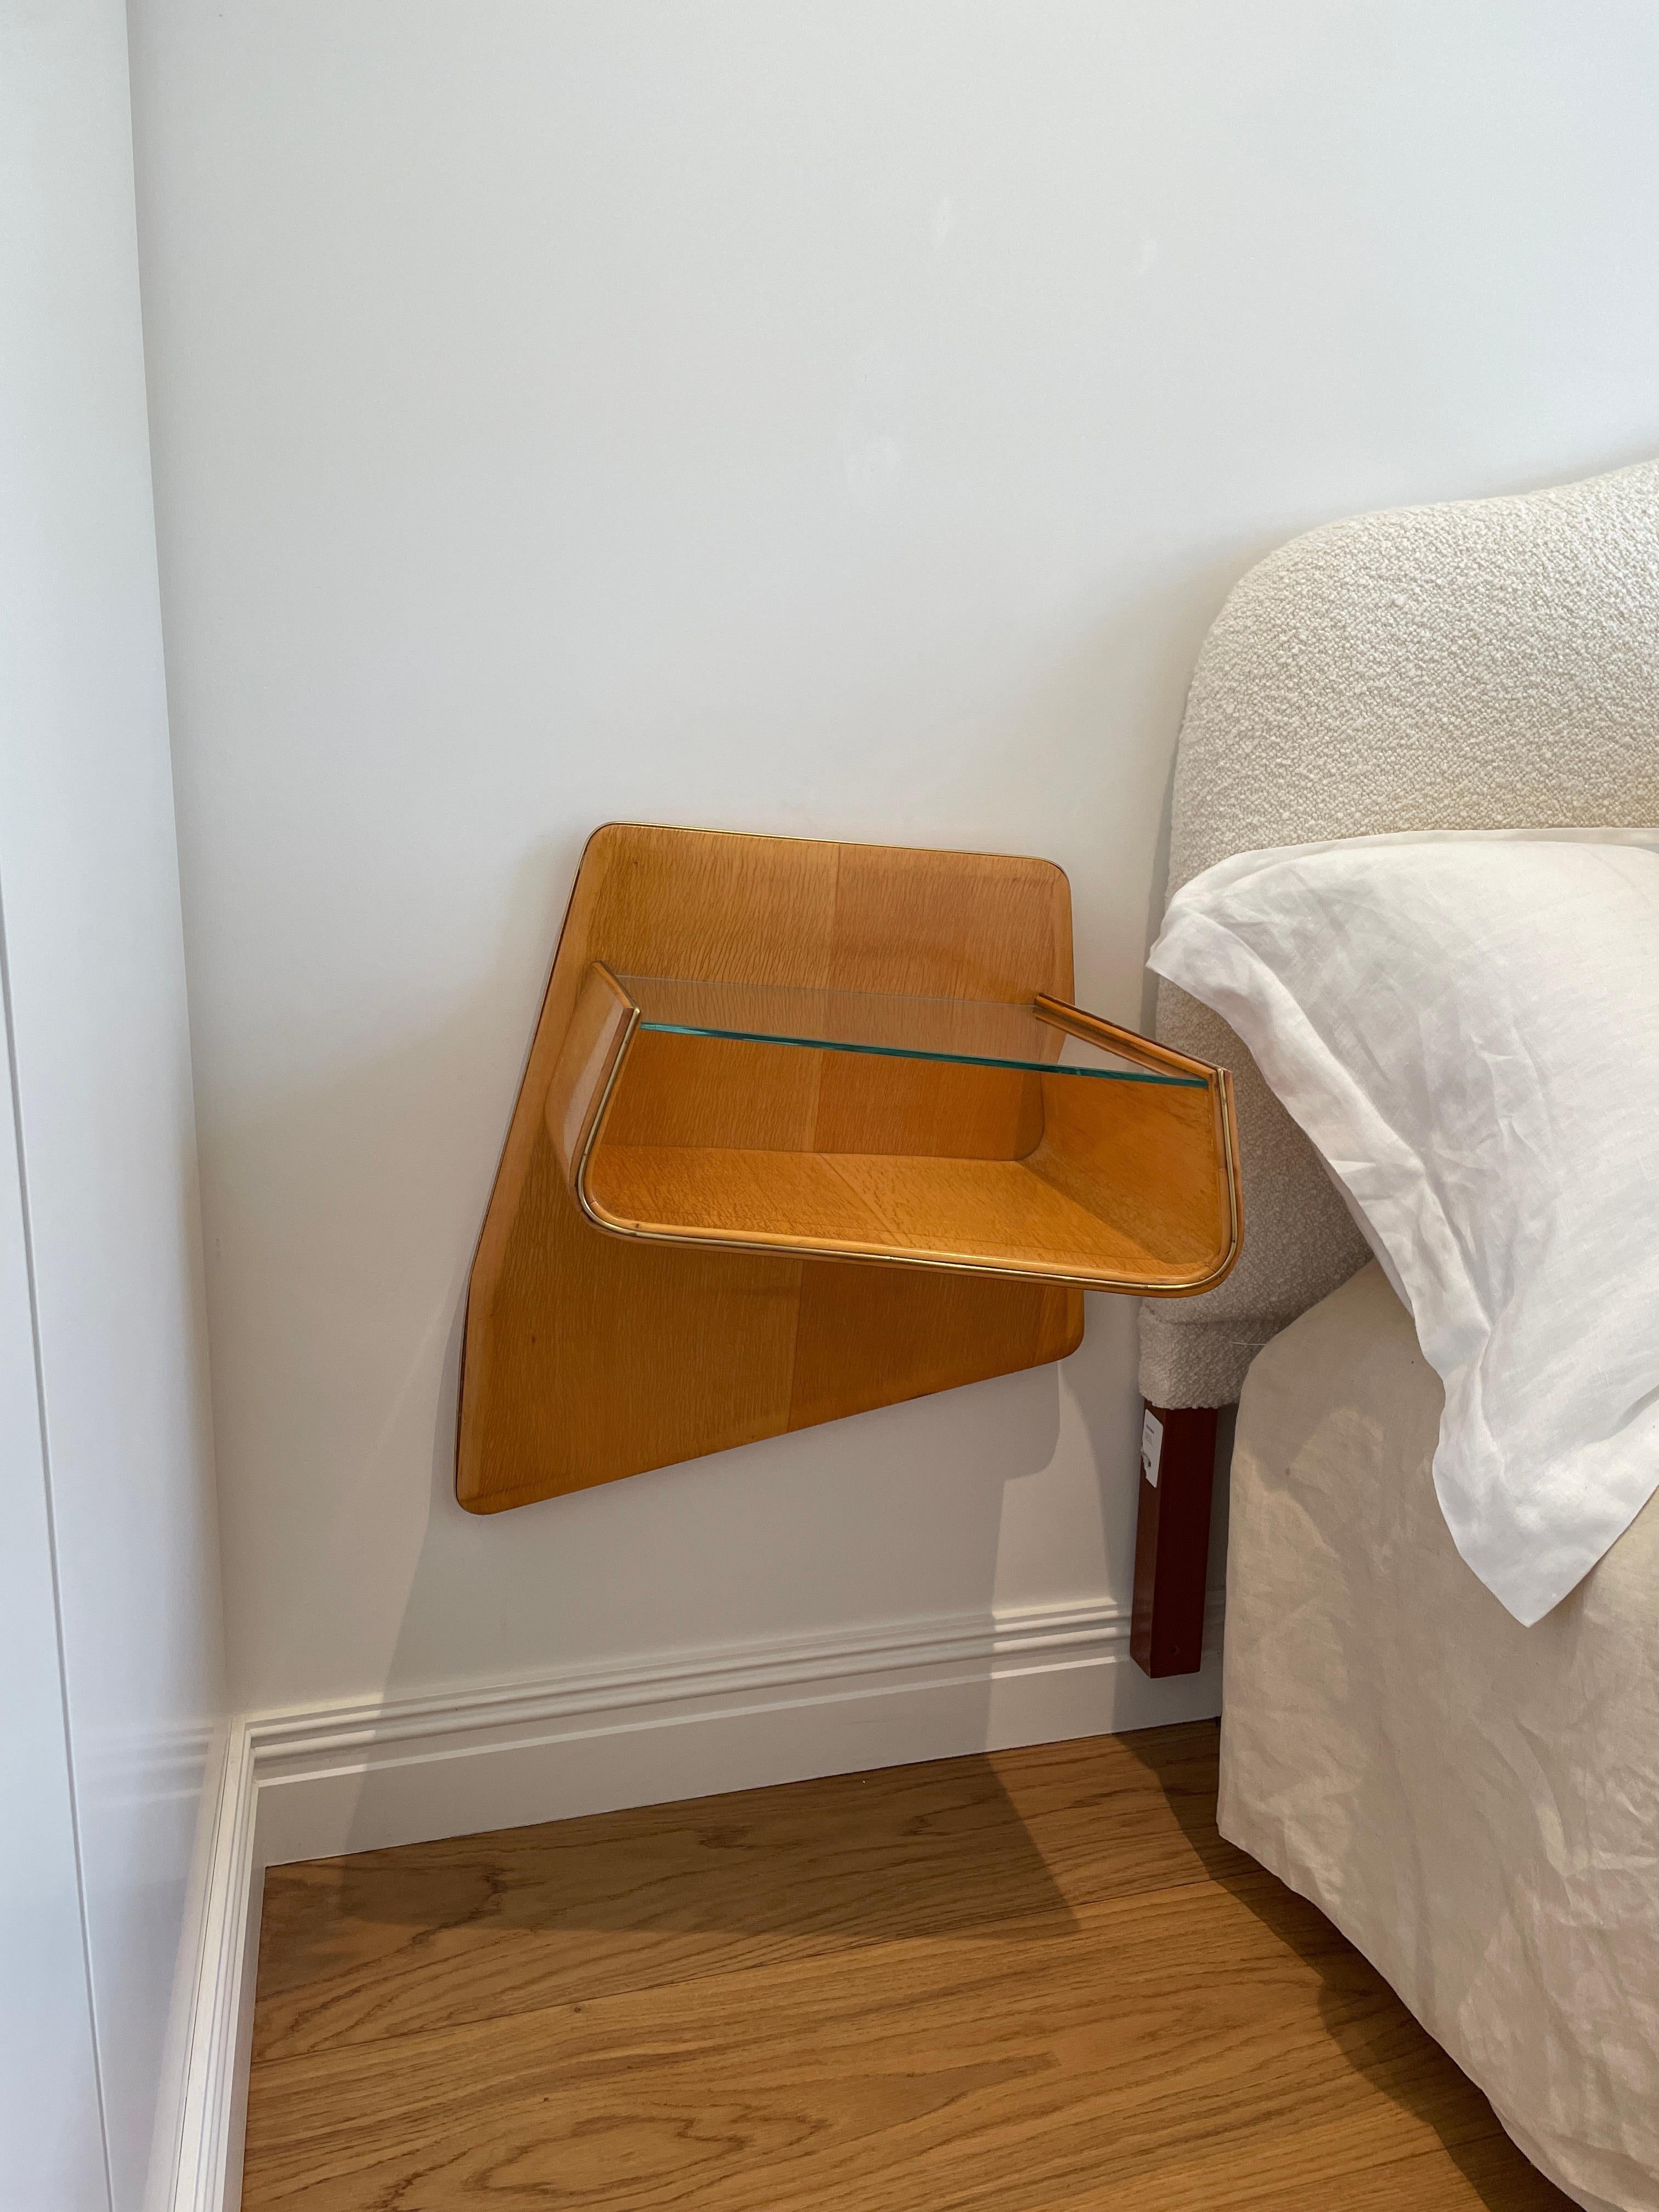 Maplewood Wall Mounted Side Tables In Good Condition For Sale In London, England